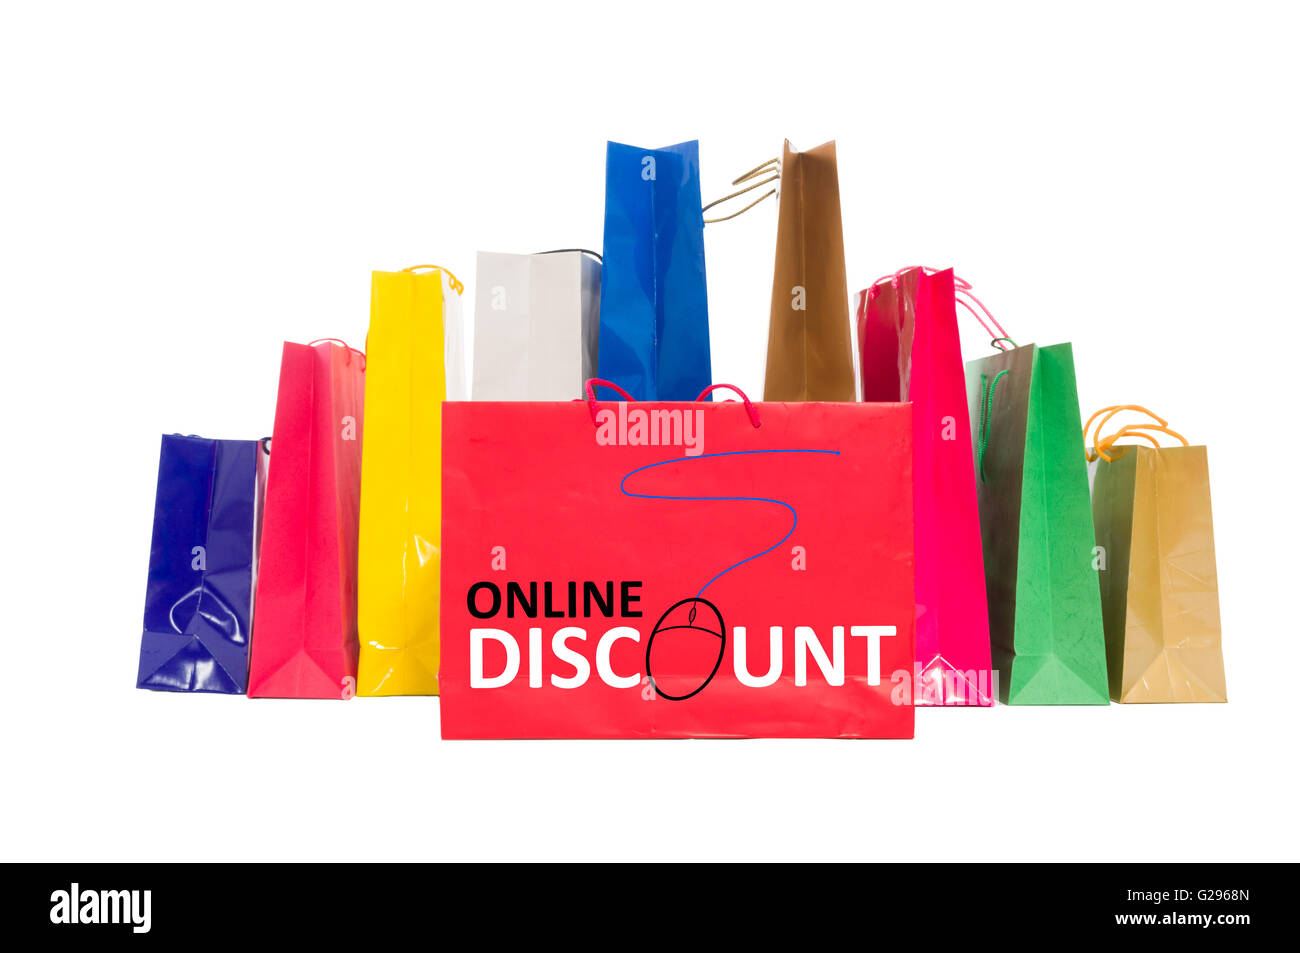 Online discount concept using shopping bags isolated on white background Stock Photo